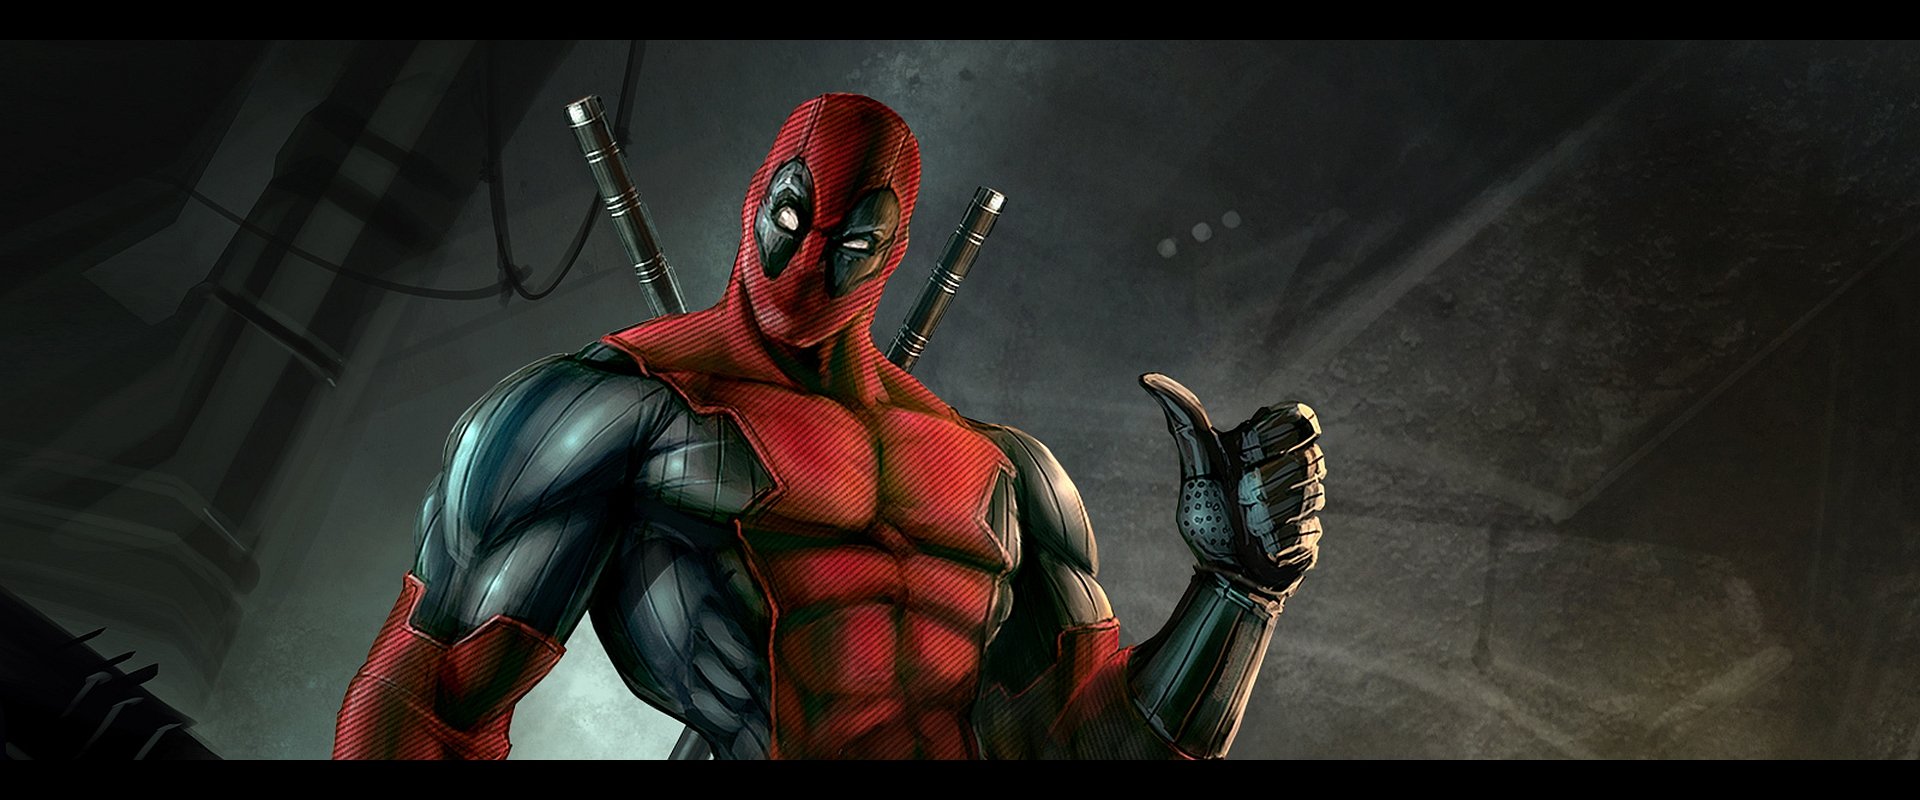  Deadpool  Wallpaper and Background Image 1920x800 ID 431230